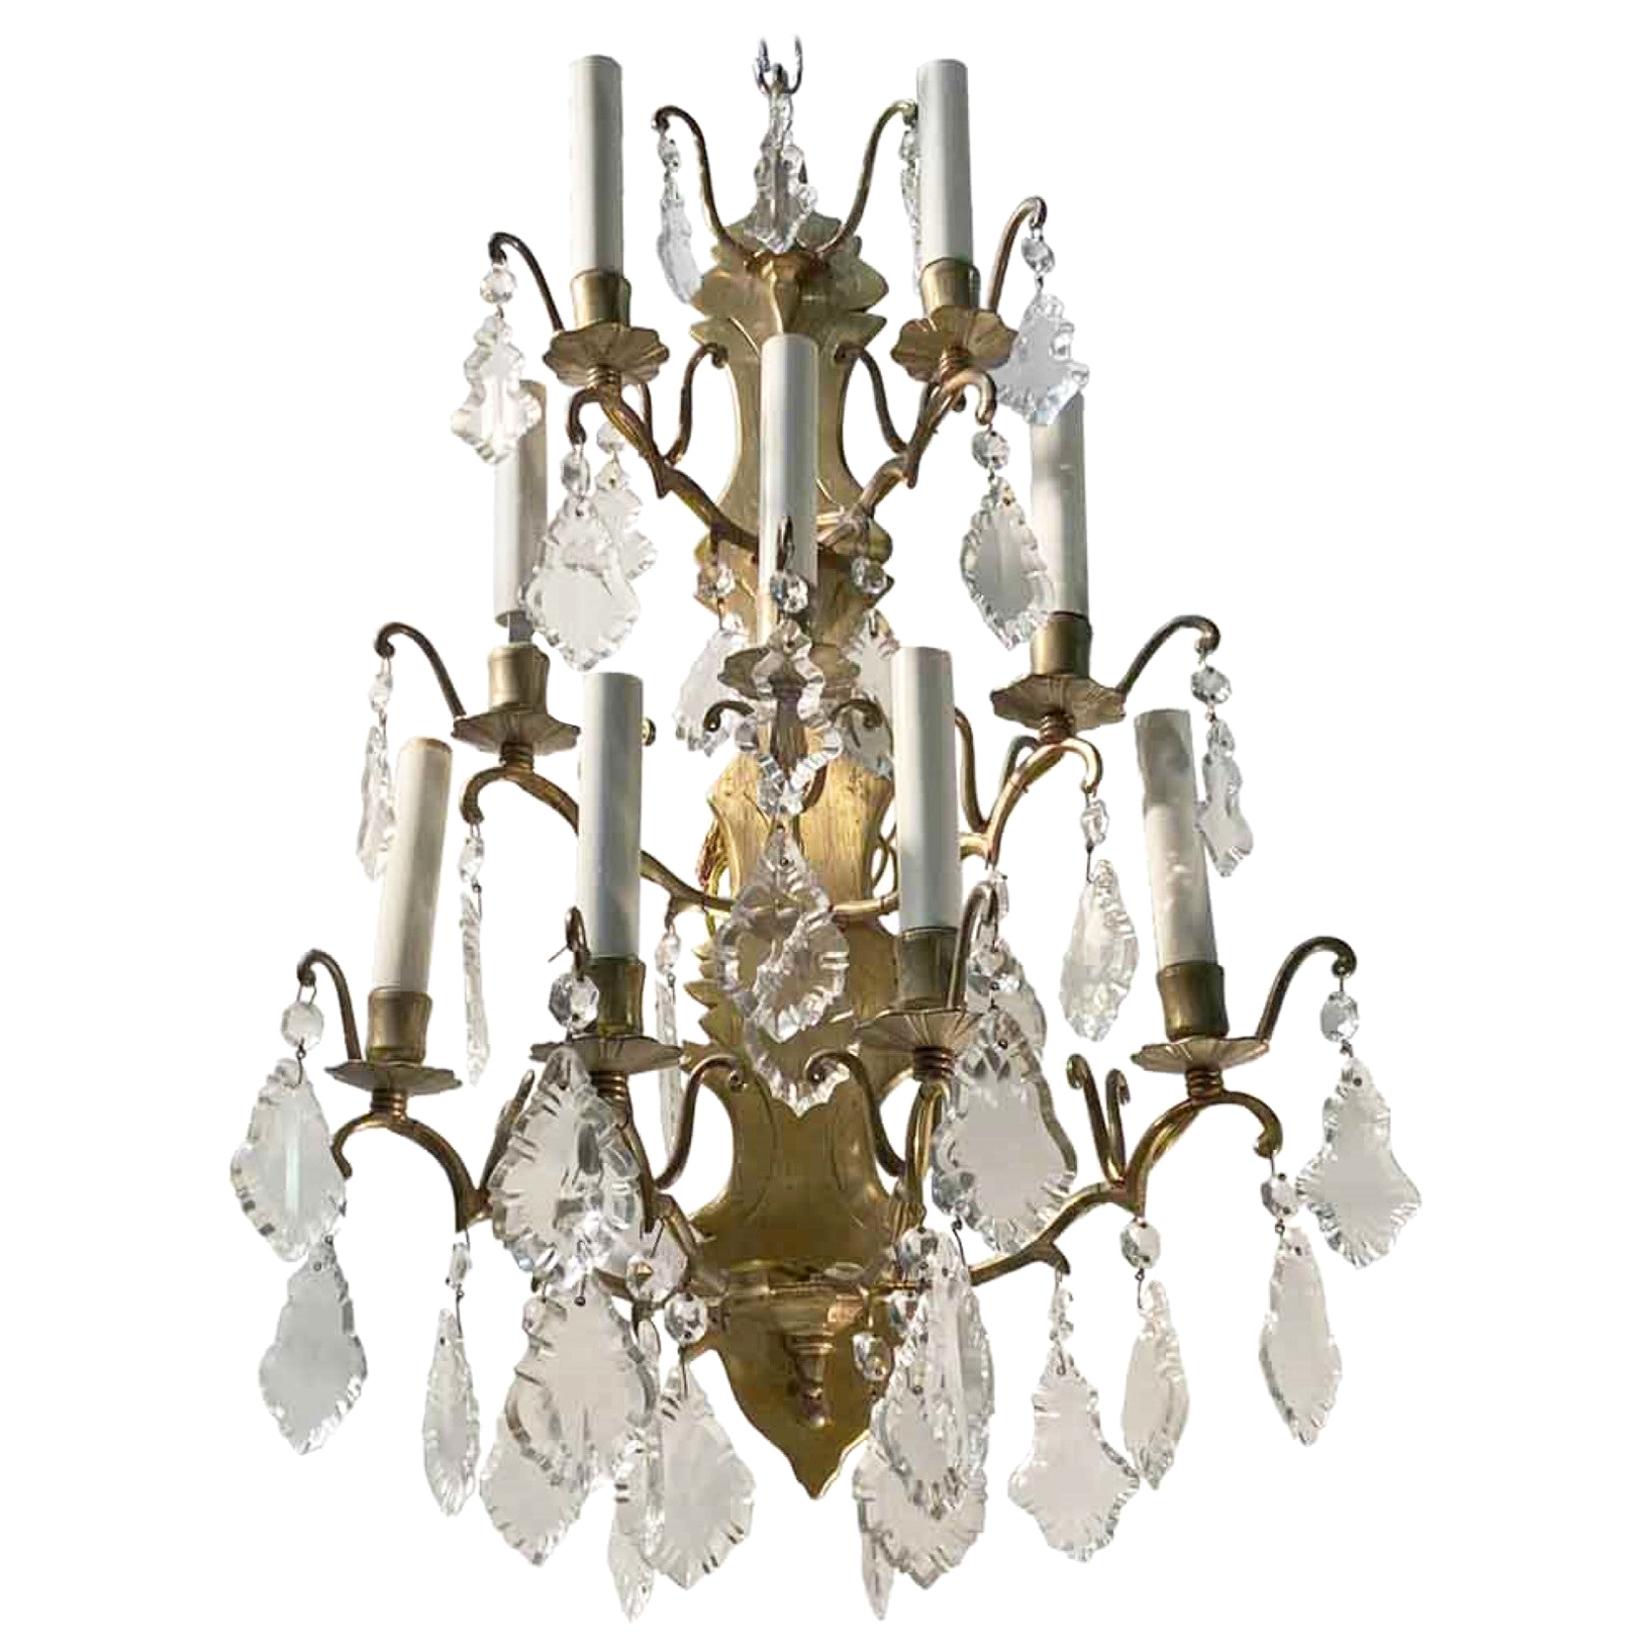 NY Plaza Hotel French Brass Crystal Sconce 9 Arms Quantity Available